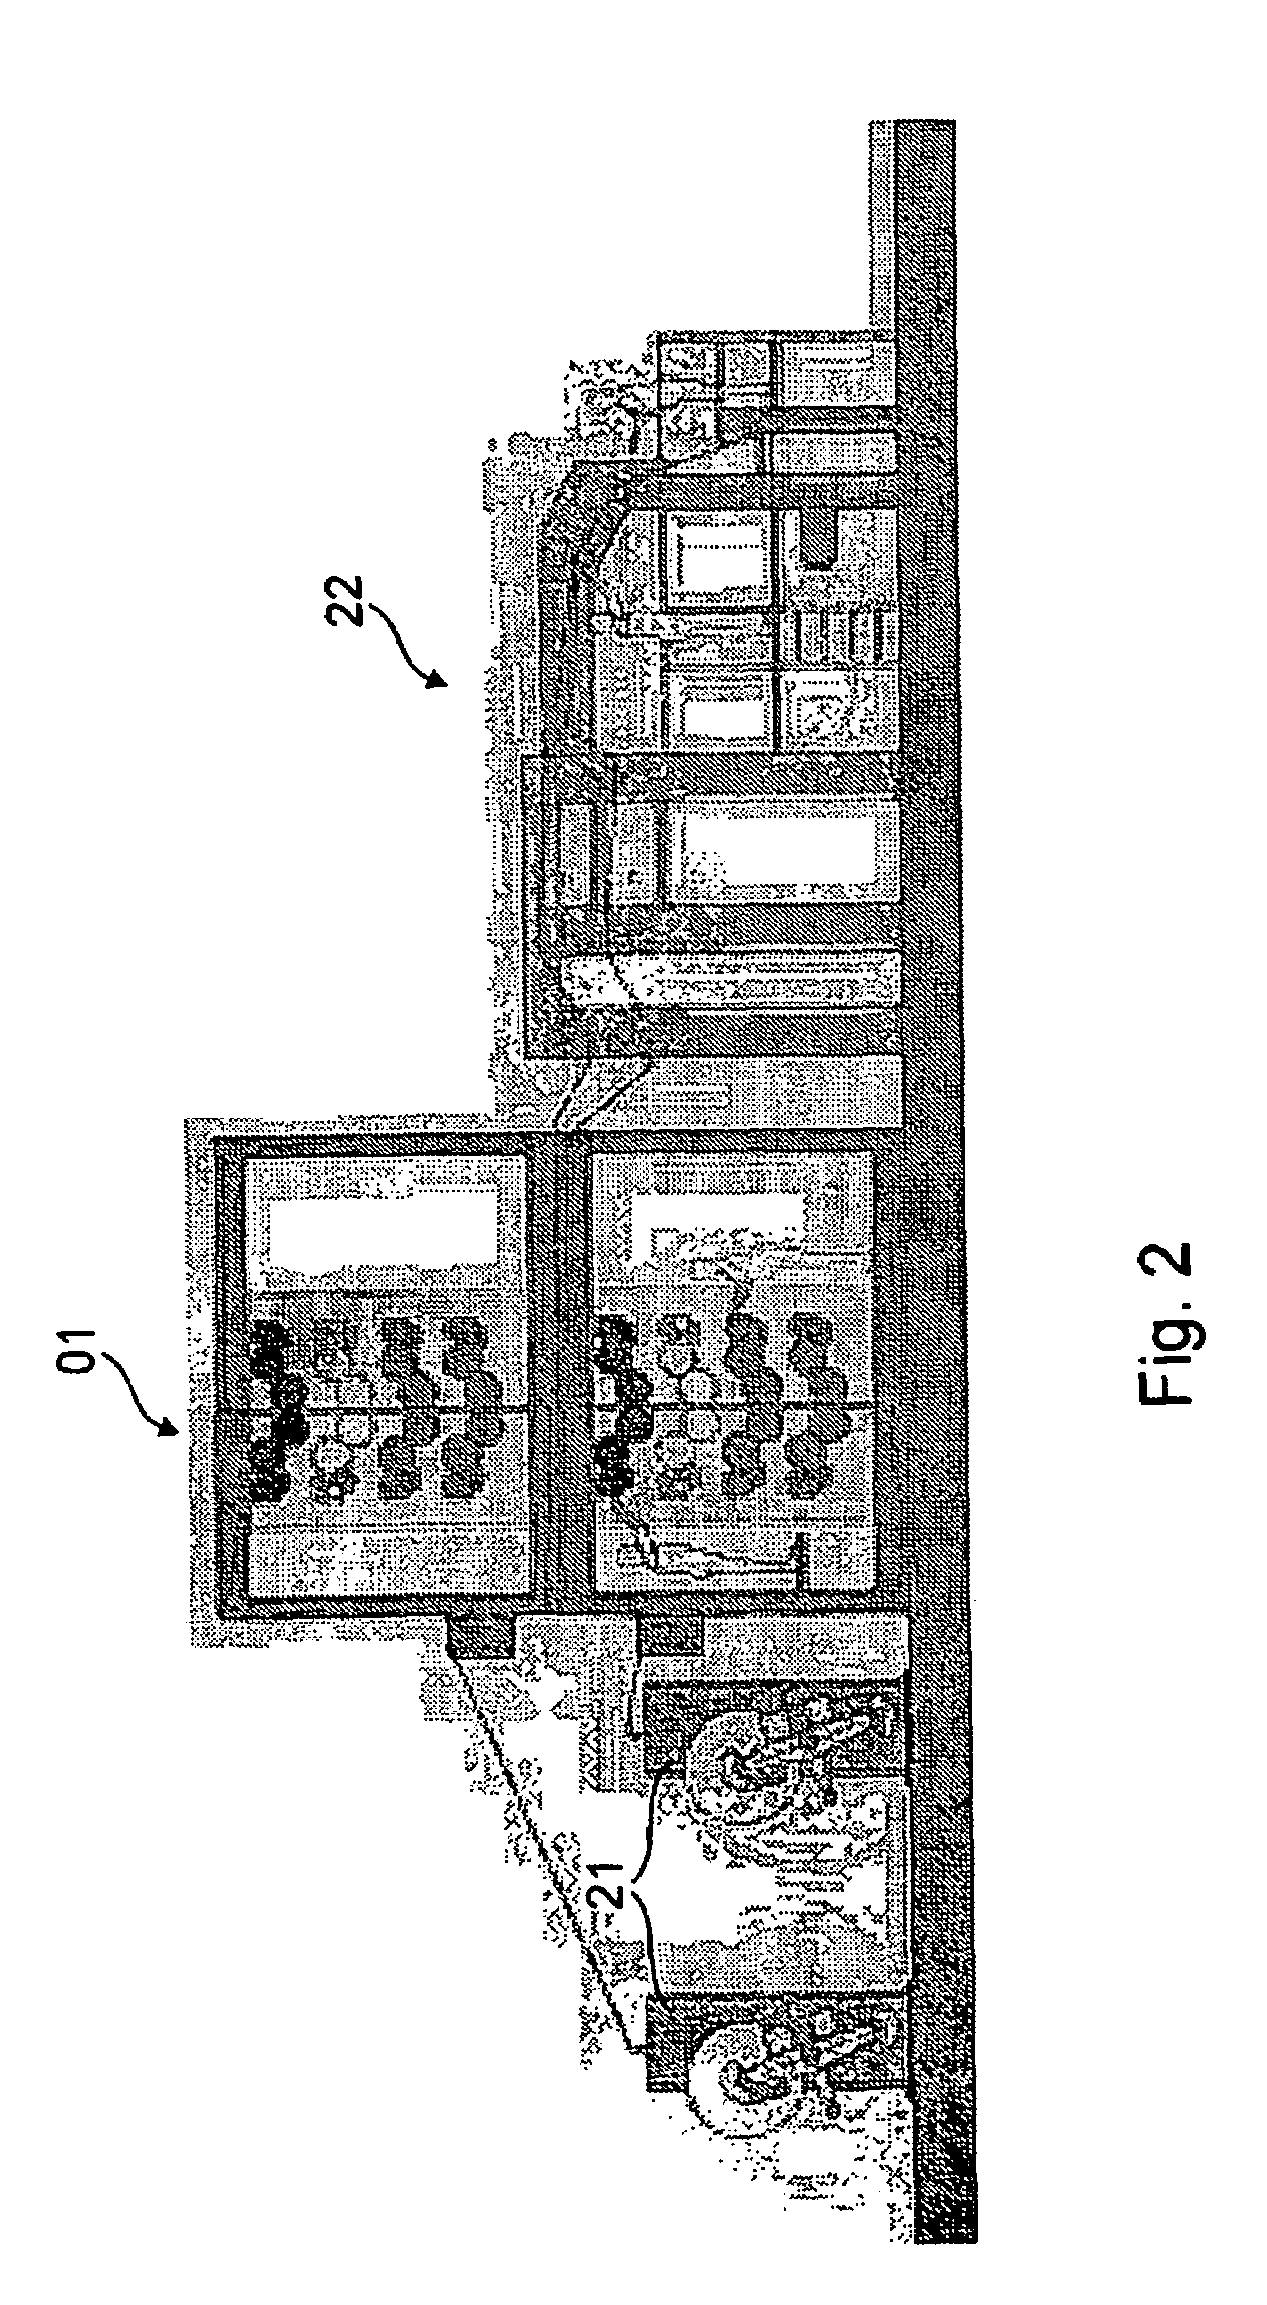 Printing machines having at least one machine element that can be adjusted by a setting element